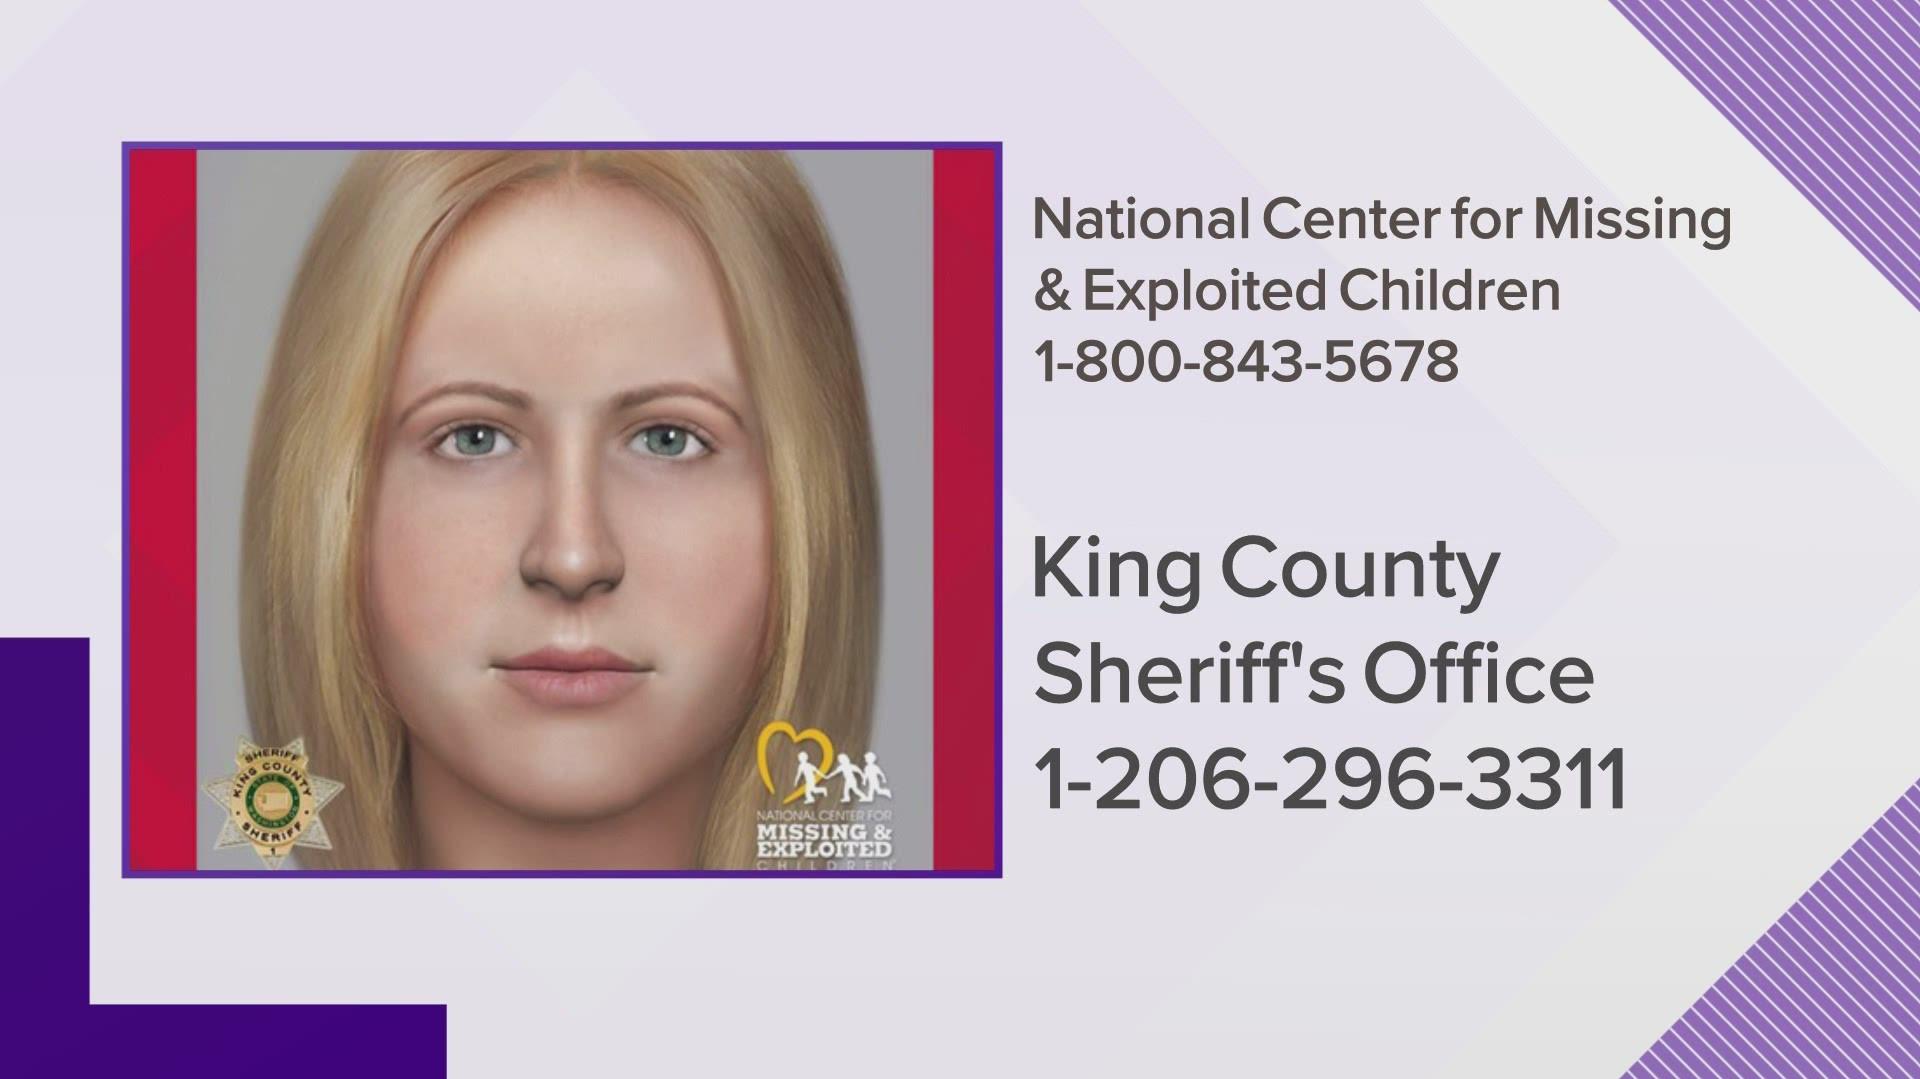 Recognize Her Image Shows Unidentified Victim Of Green River